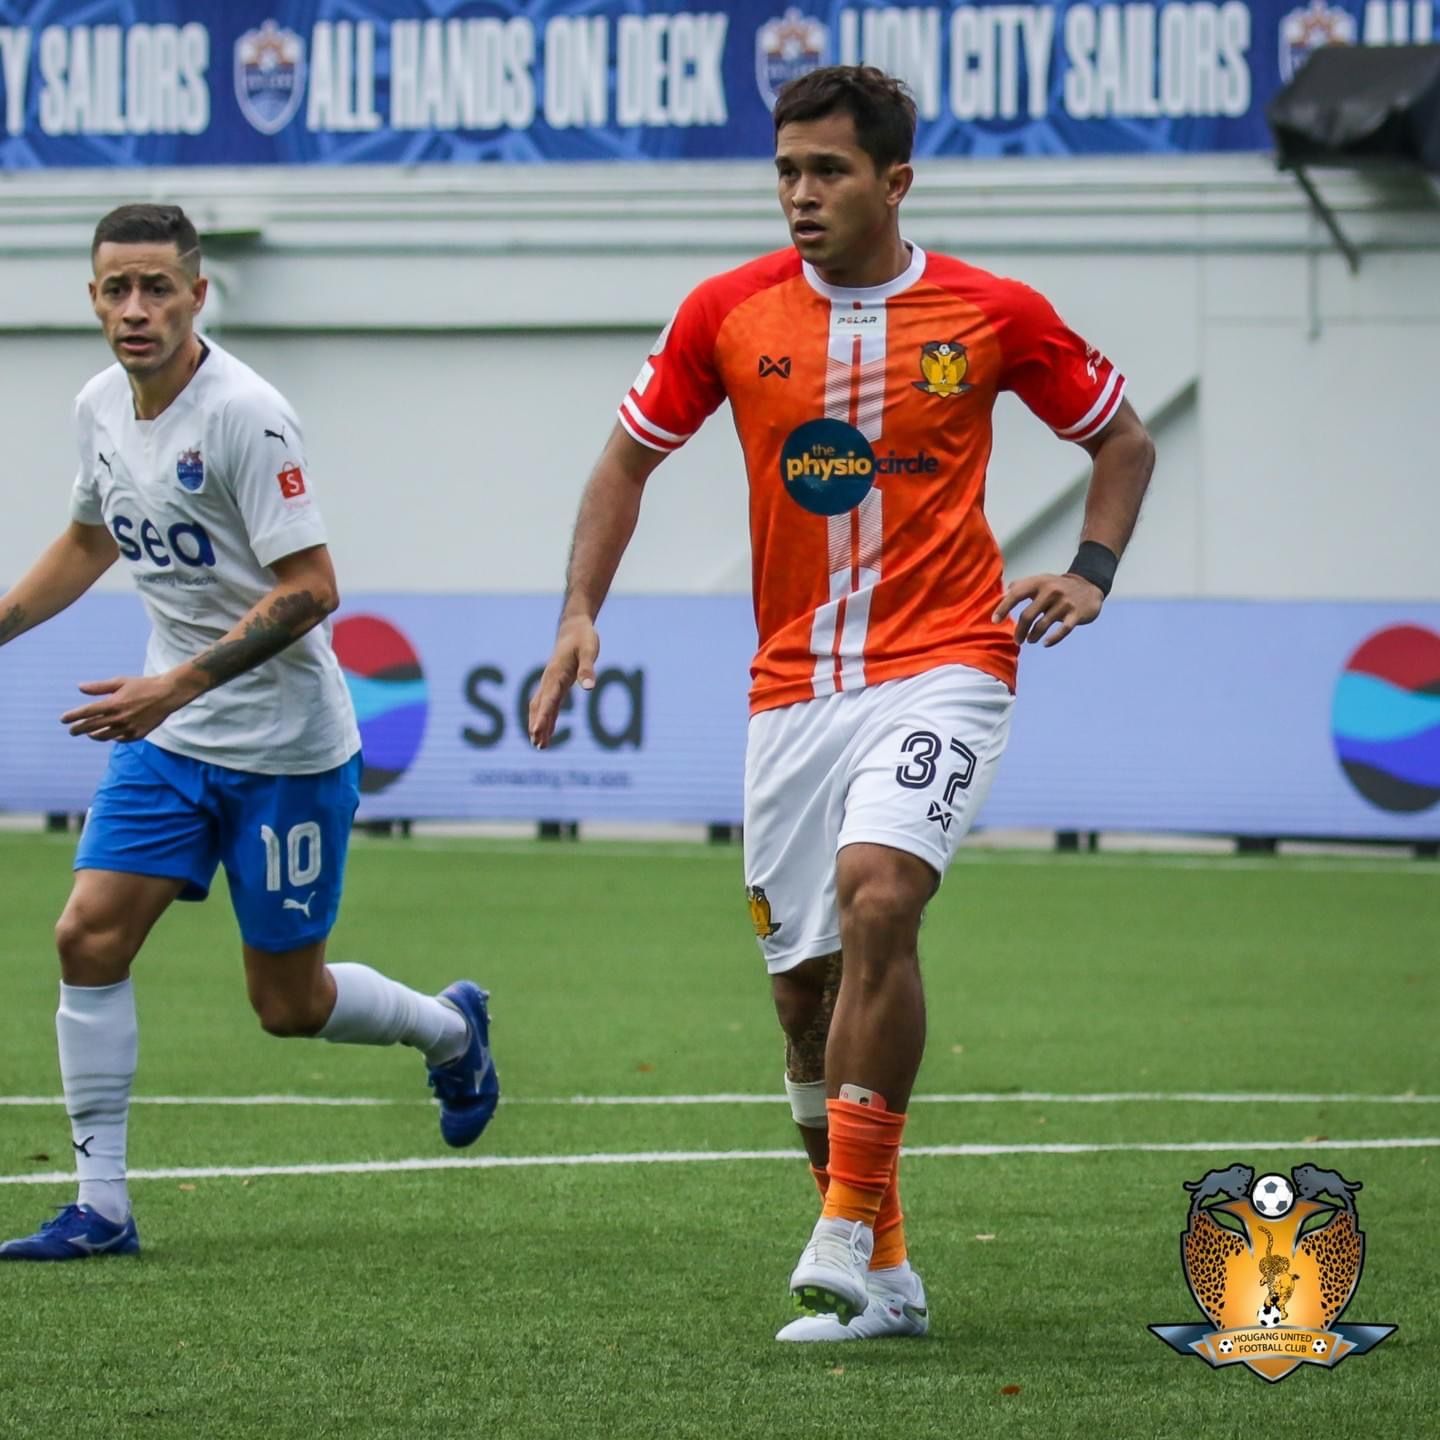 Balestier Central vs Hougang United Predictions, Betting Tips & Odds │12 AUGUST, 2022